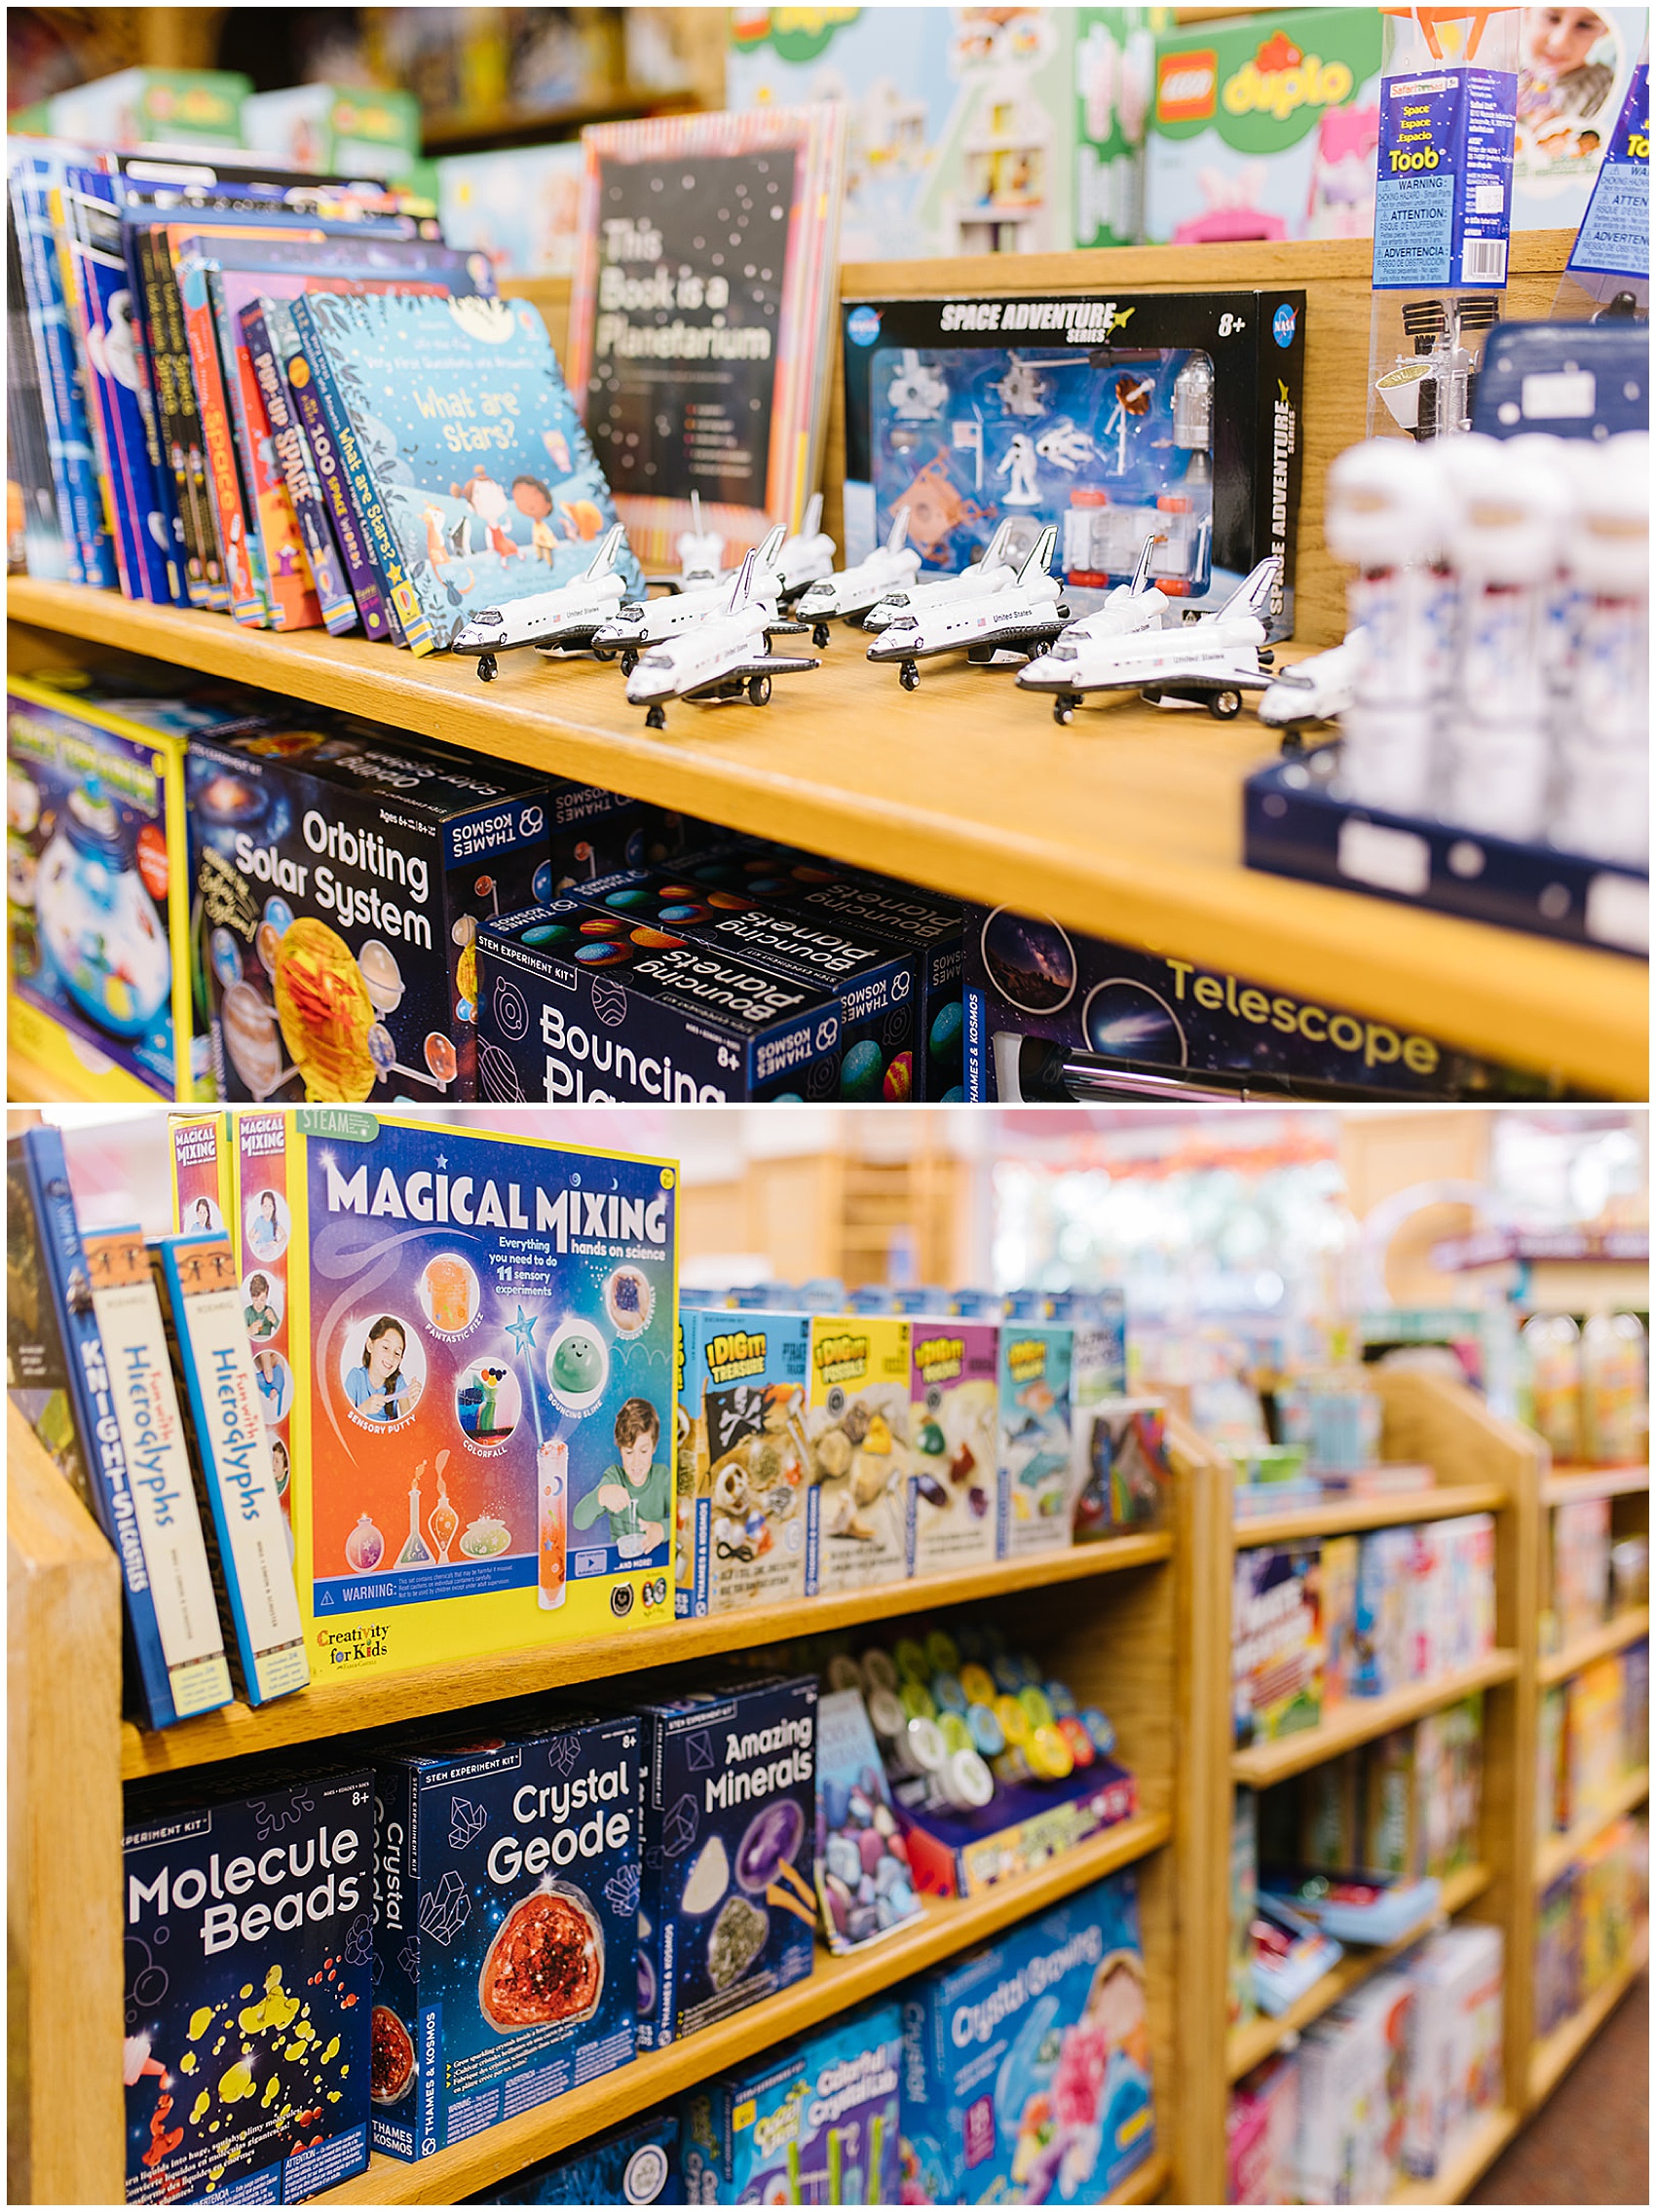 Science and space kits on display in a toy store